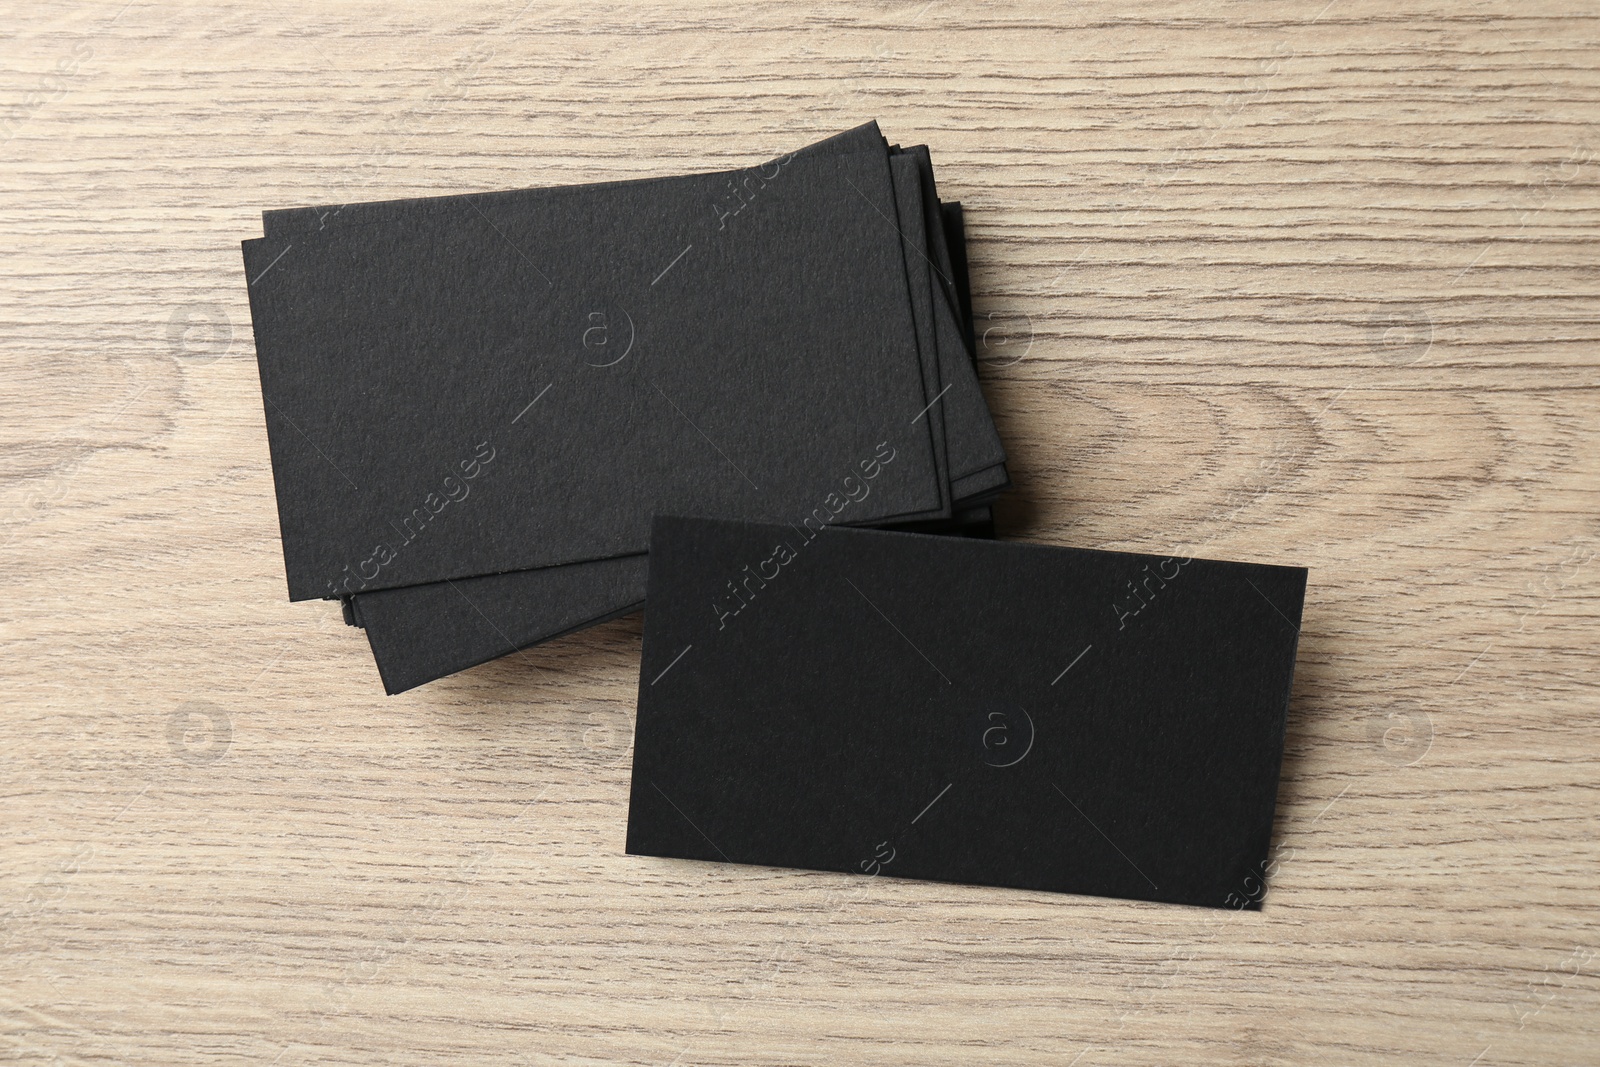 Photo of Blank black business cards on wooden table, top view. Mockup for design